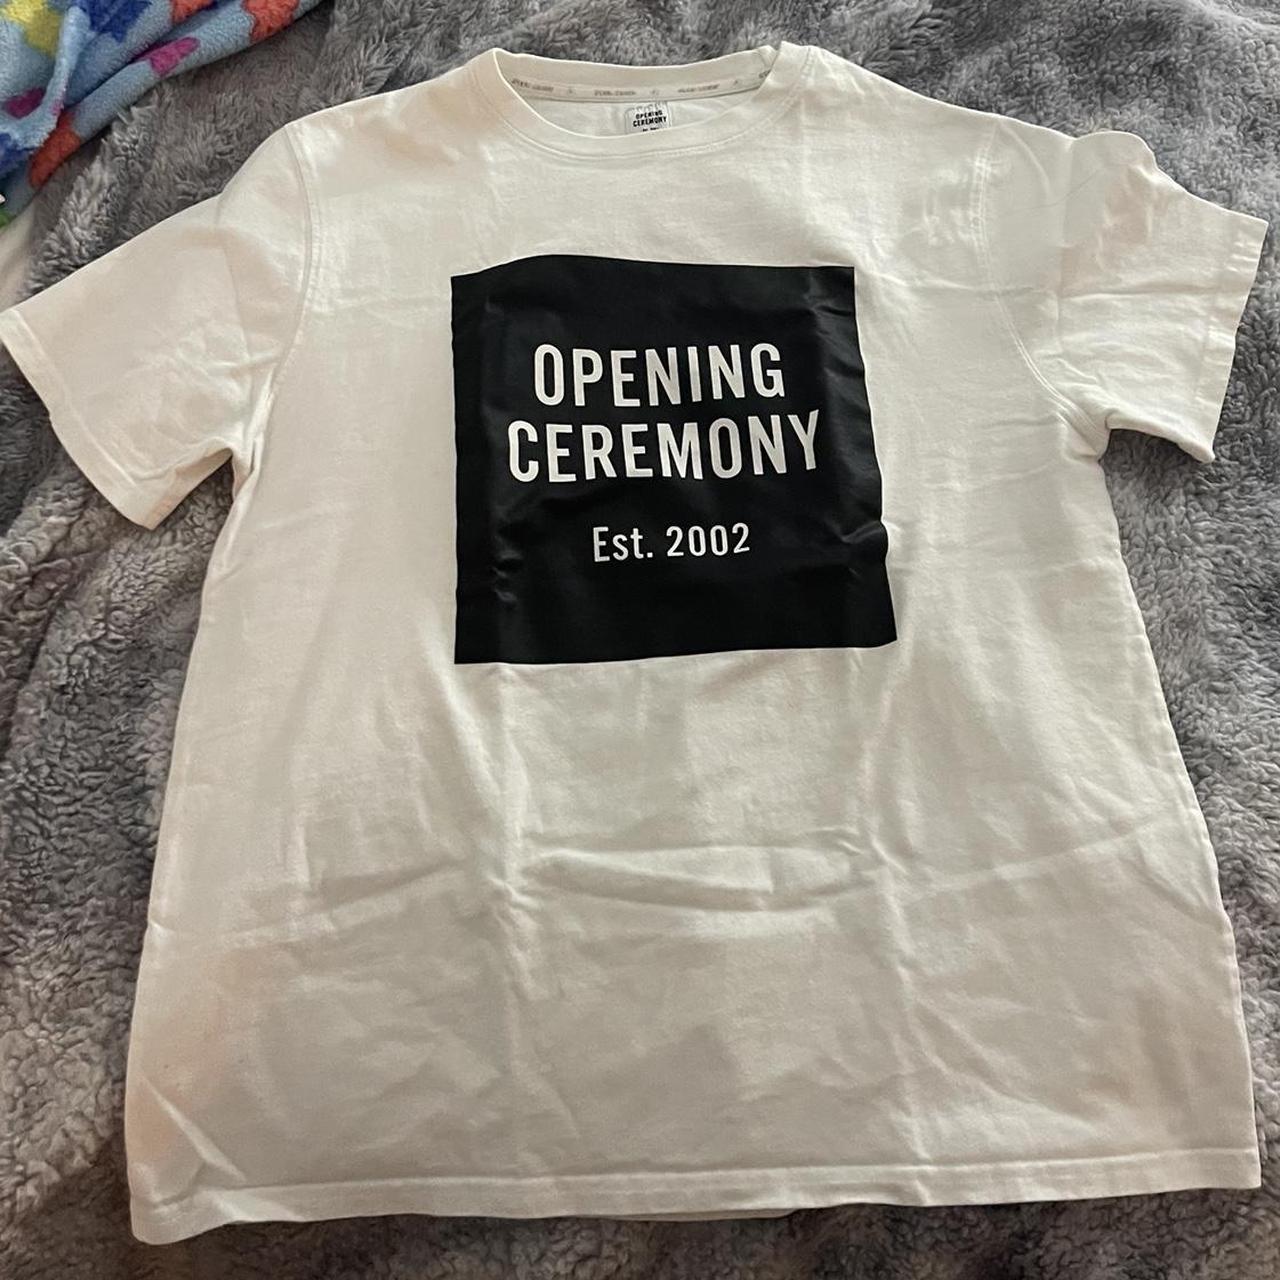 Opening Ceremony Women's White and Black T-shirt